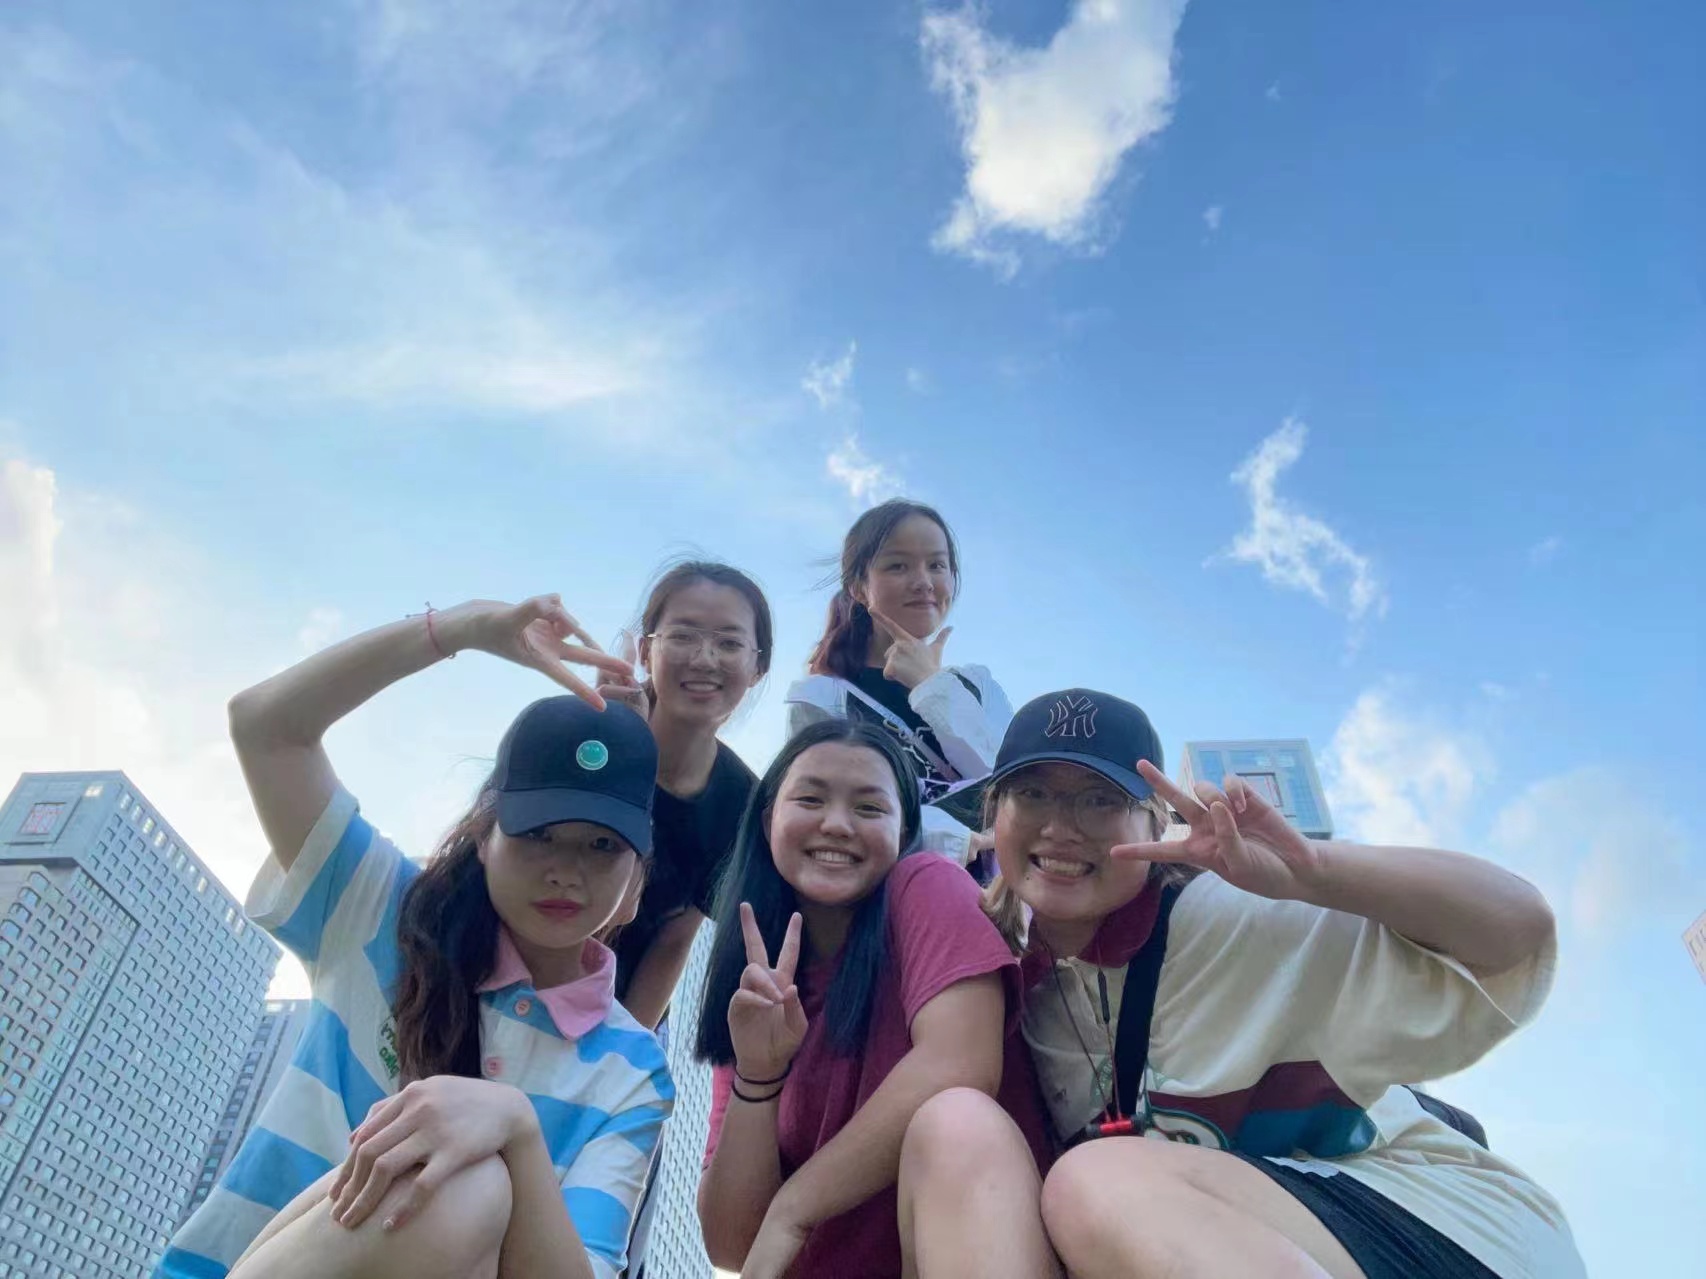 Wu with her friends